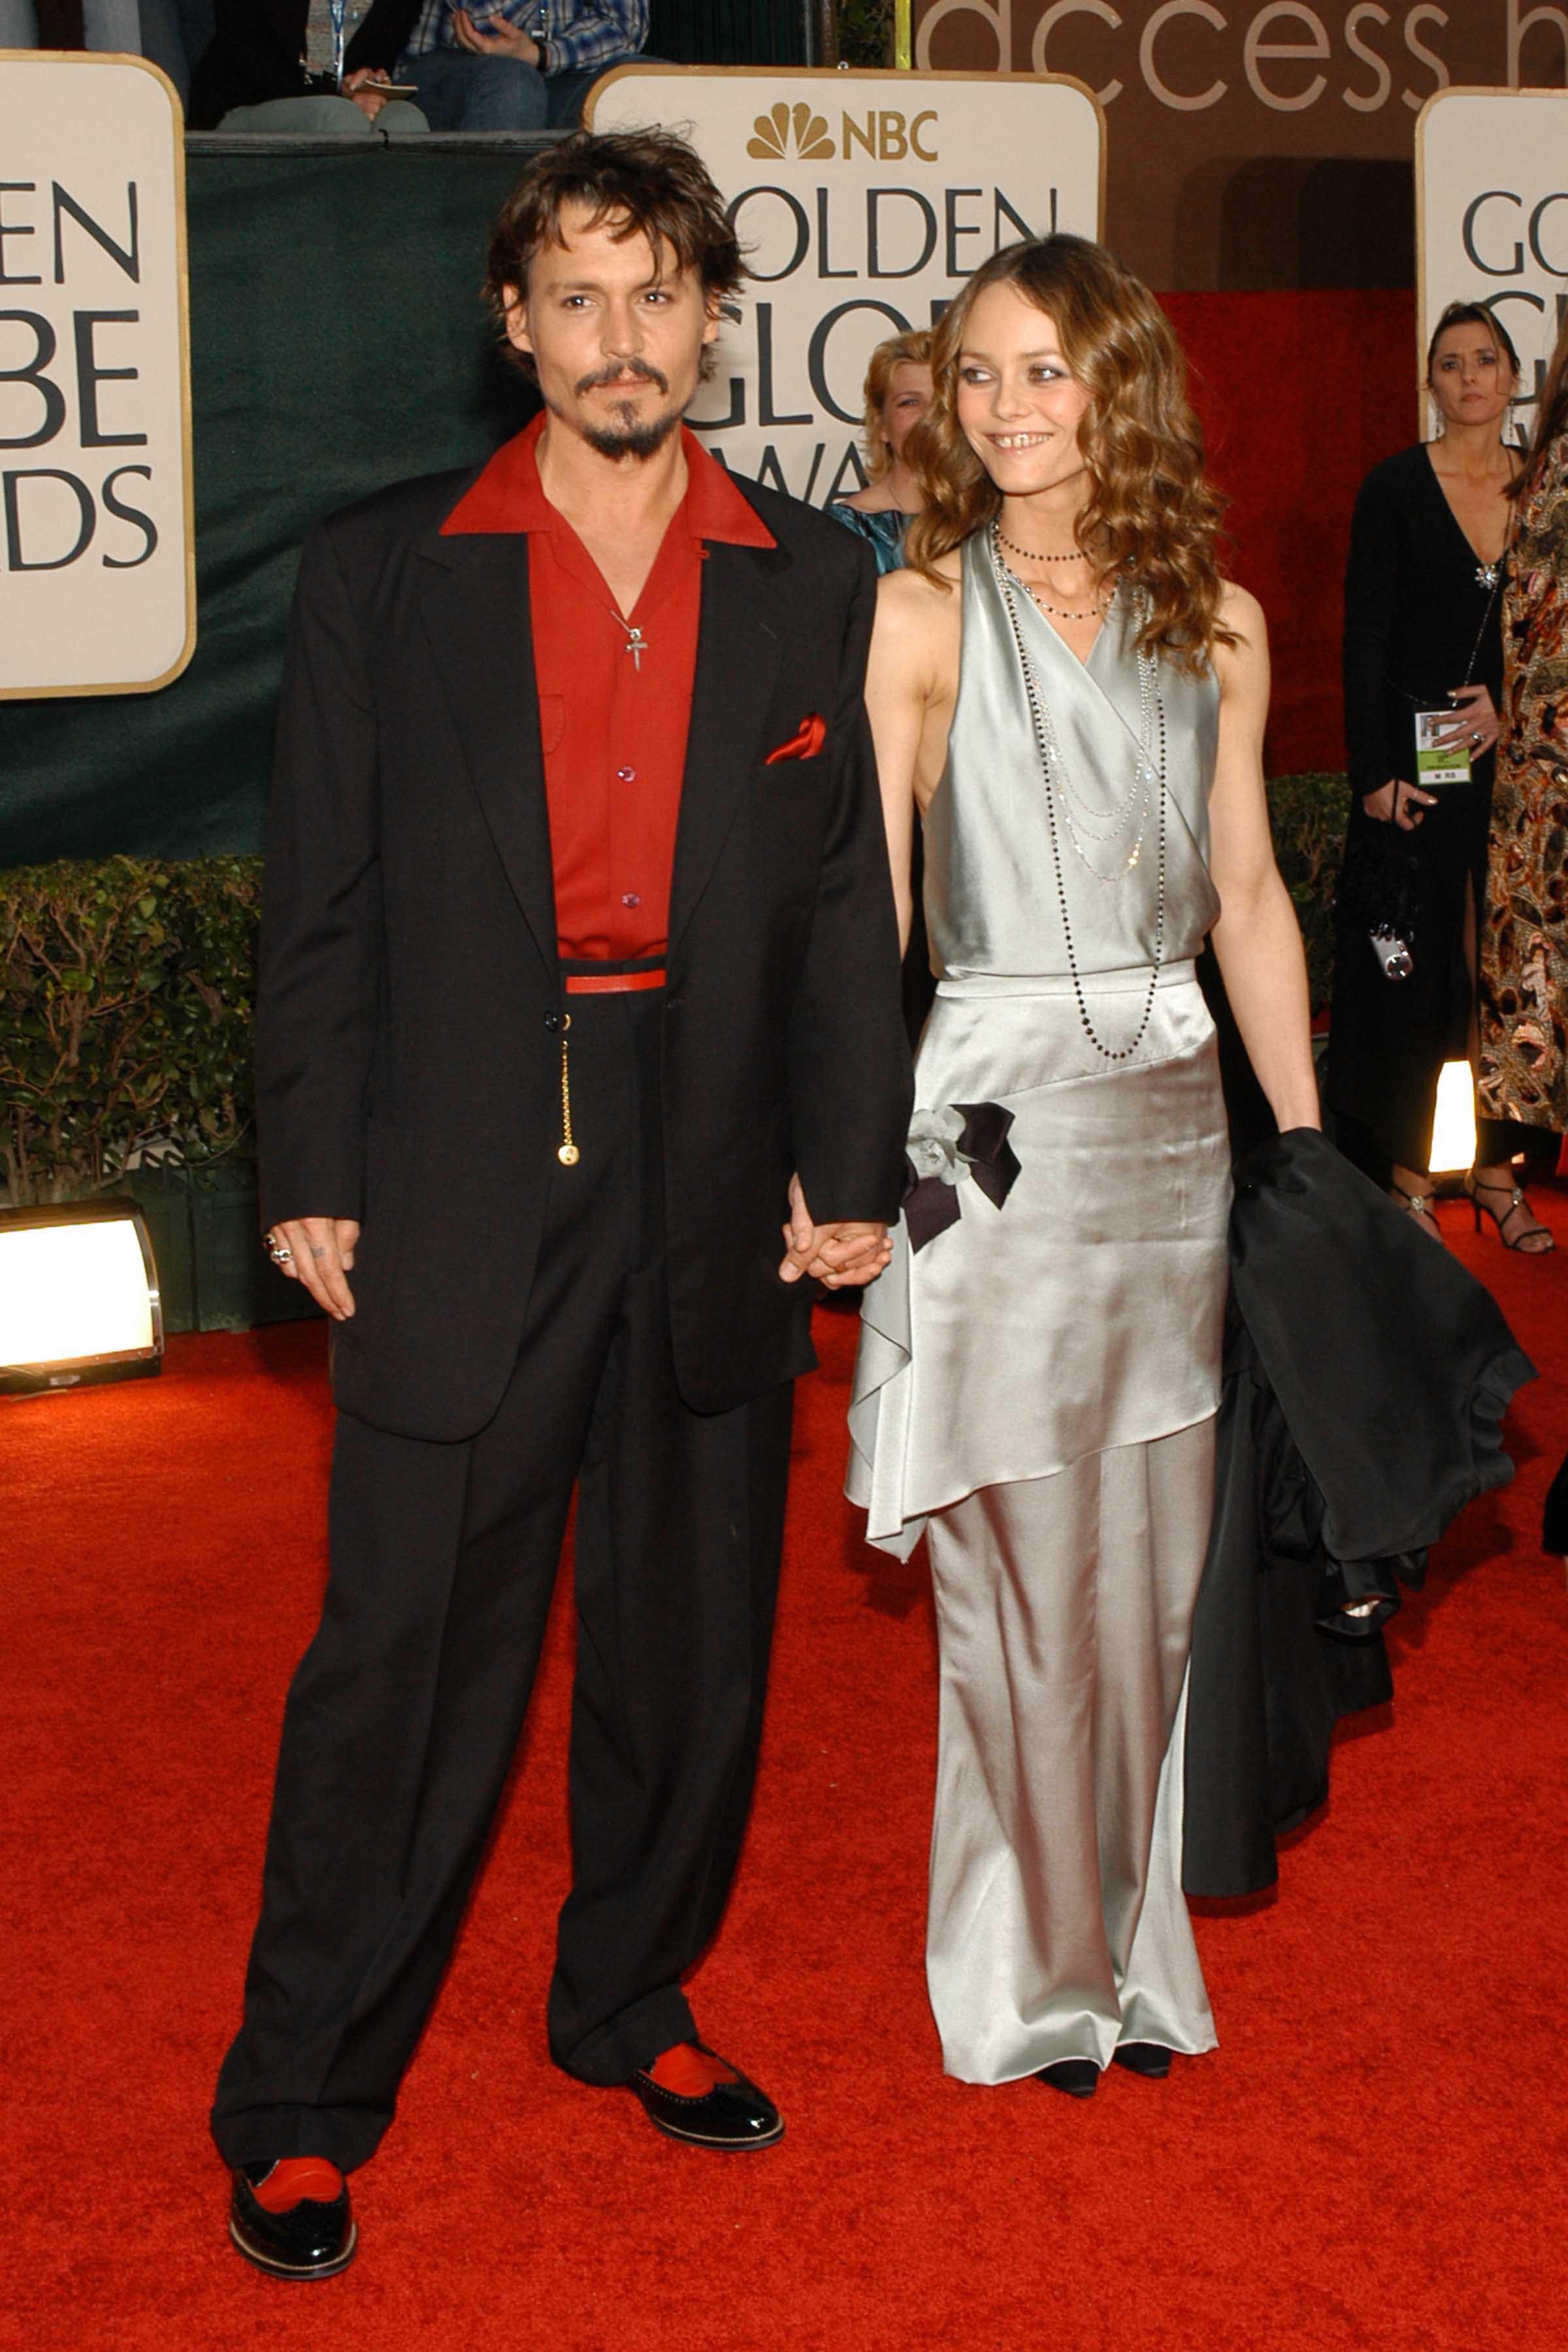 Johnny Depp and Vanessa Paradis at the 63rd Annual Golden Globe Awards on January 16, 2006, in Beverly Hills, California. | Source: Getty Images